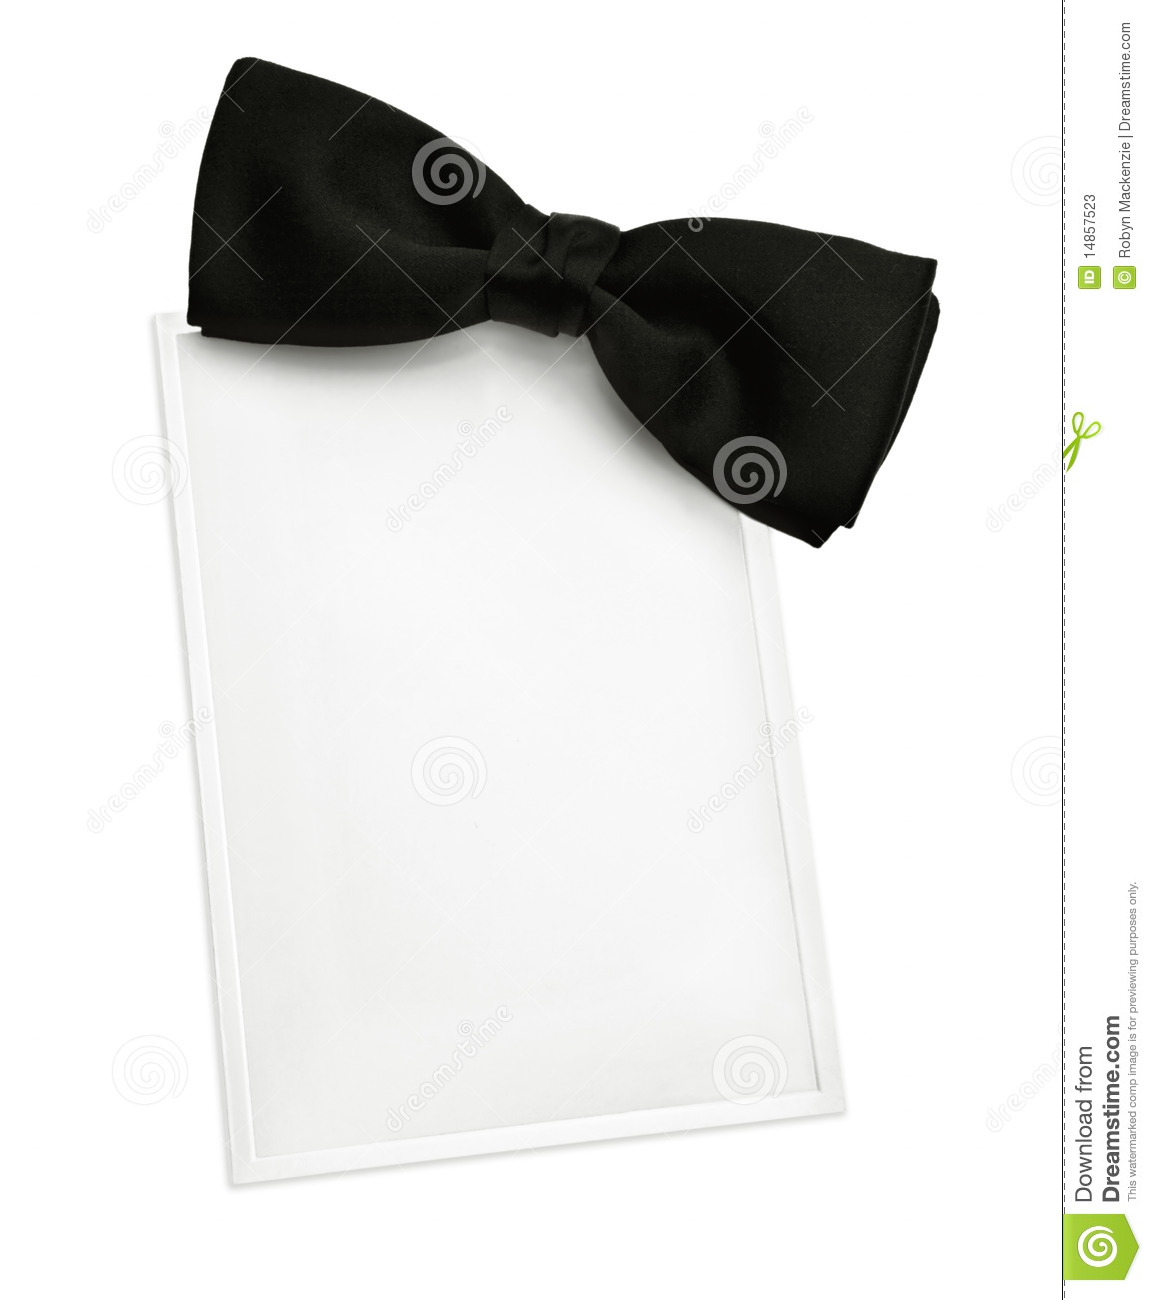 Black Tie Invitation Stock Image Image Of Photograph 14857523 throughout dimensions 1152 X 1300